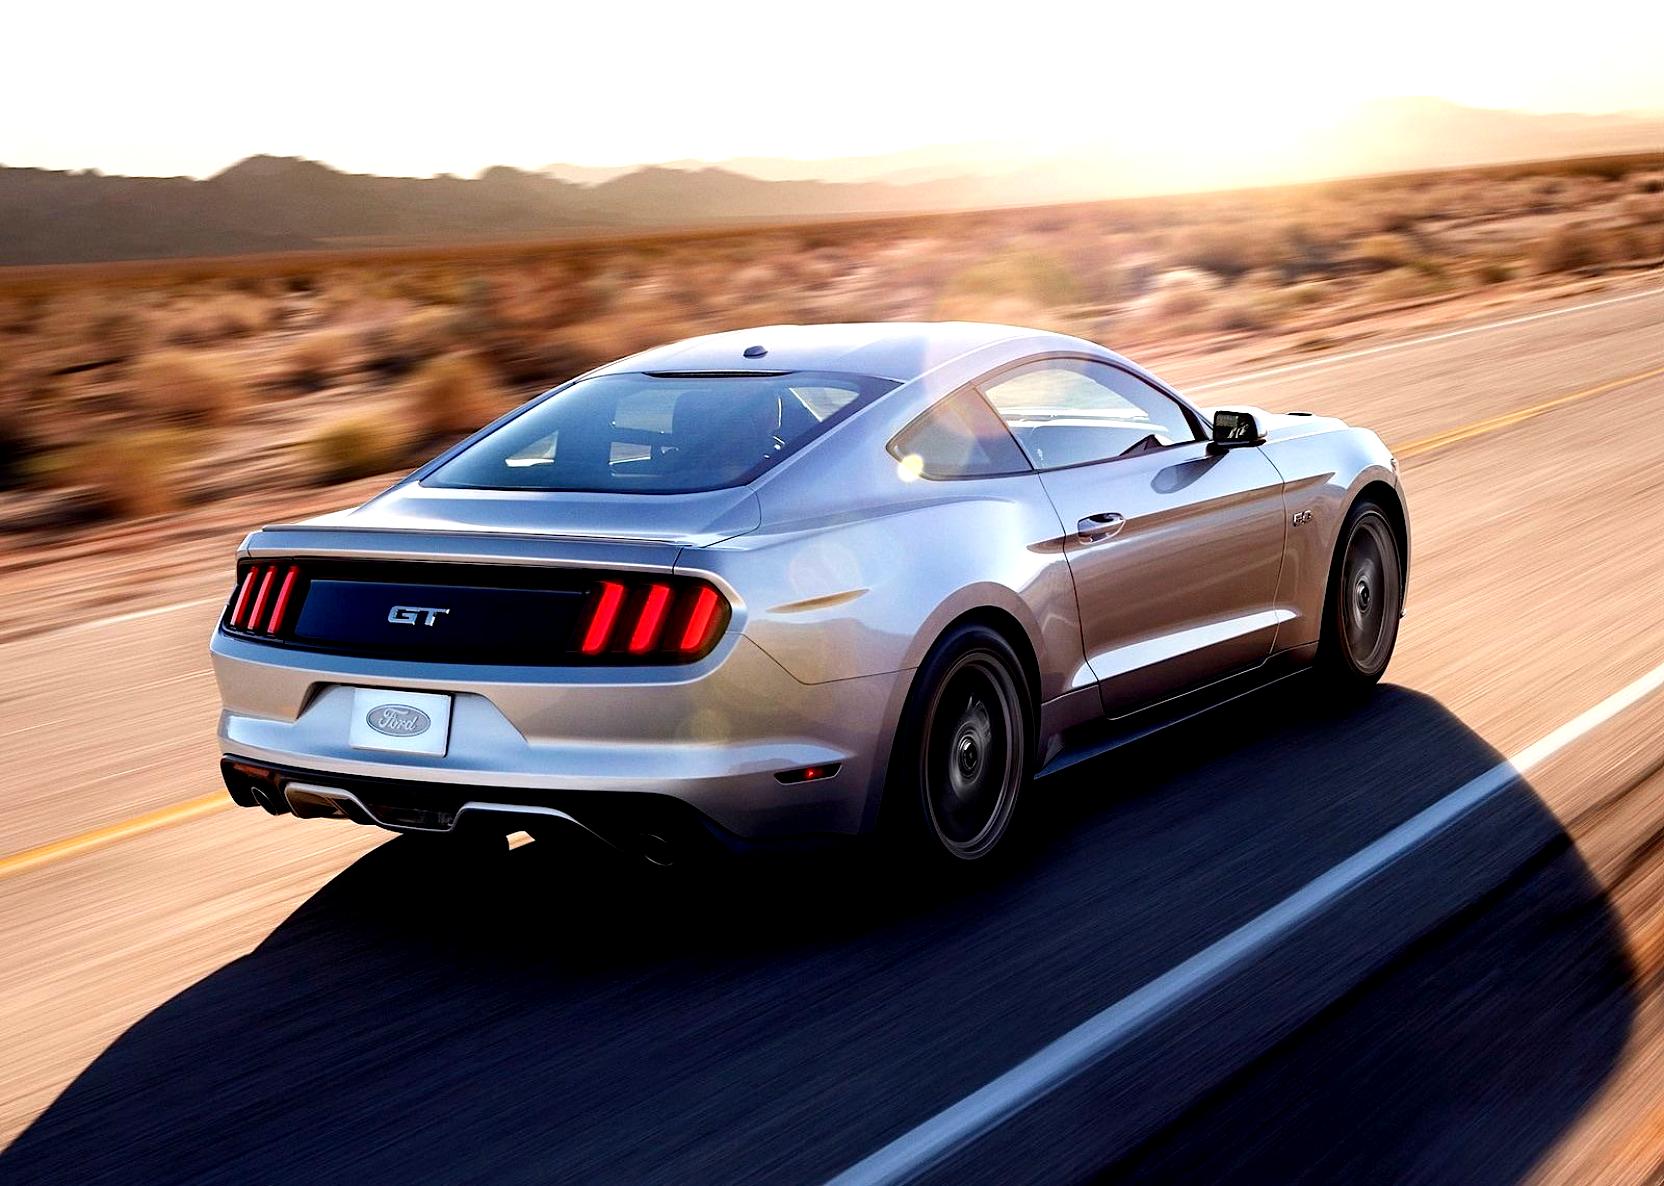 Ford Mustang 2014 #107